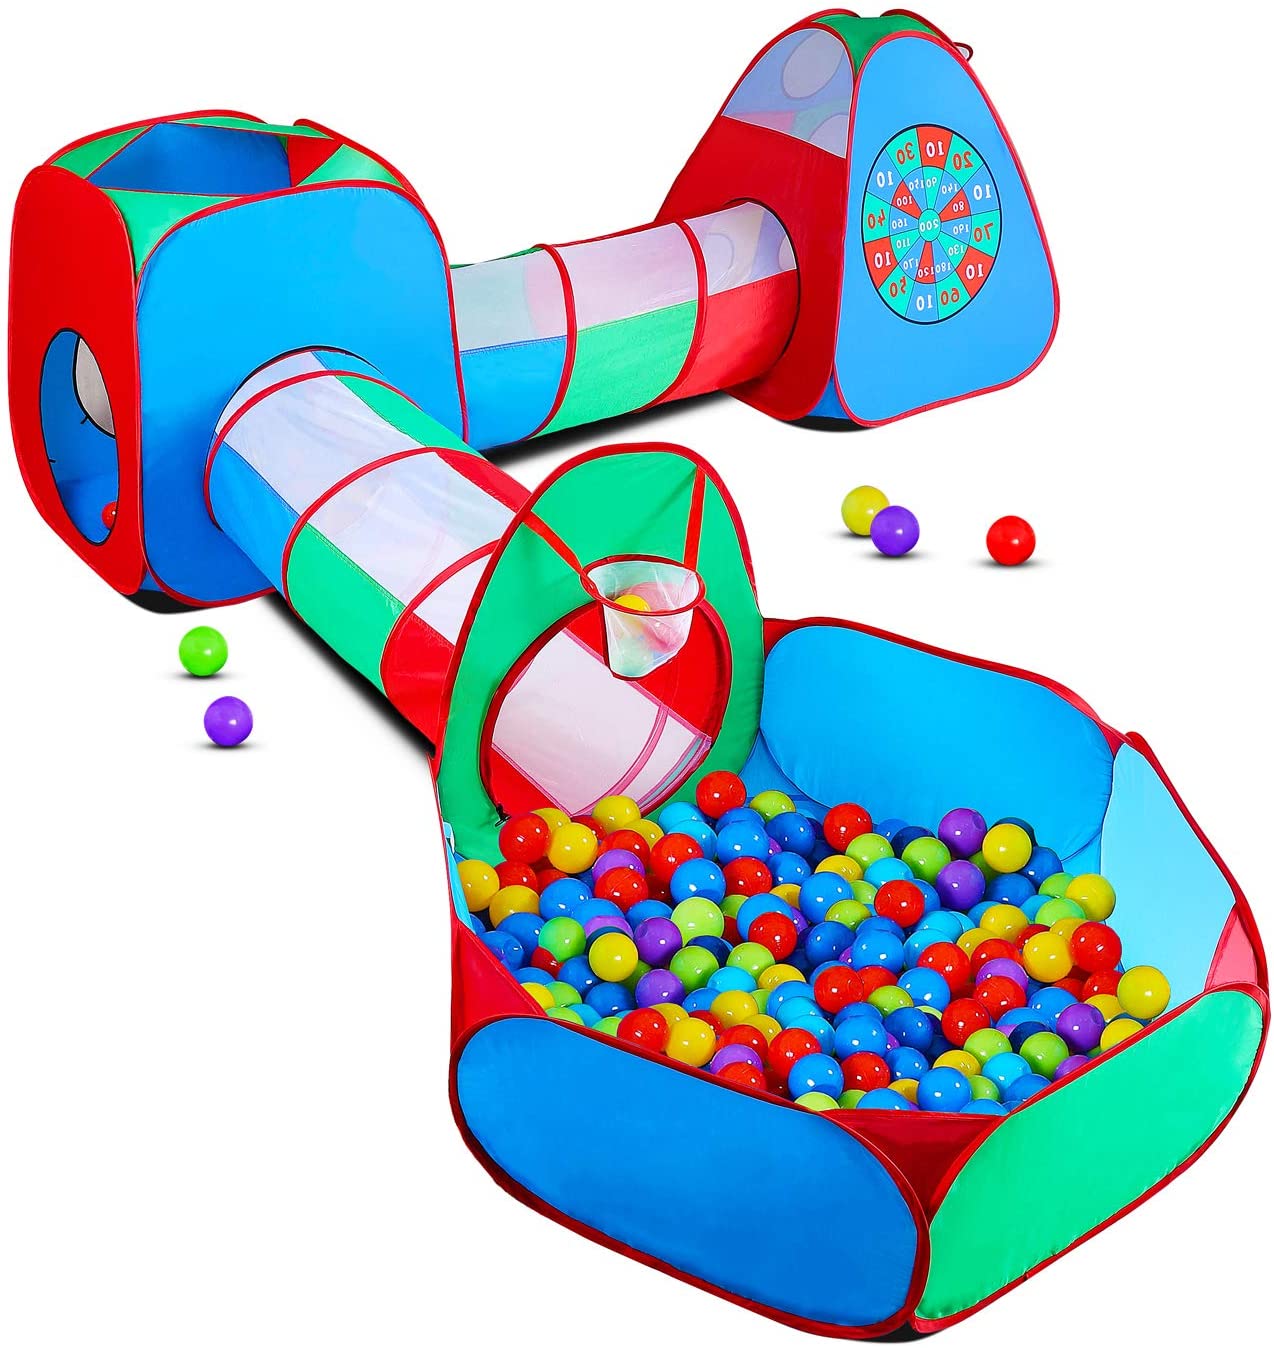 Kids Play Tents Crawl Tunnels Ball Pit with Basketball Hoop Pop Up Playhouse For Baby Babies Toddlers Toy Tent | kids tent with tunnels